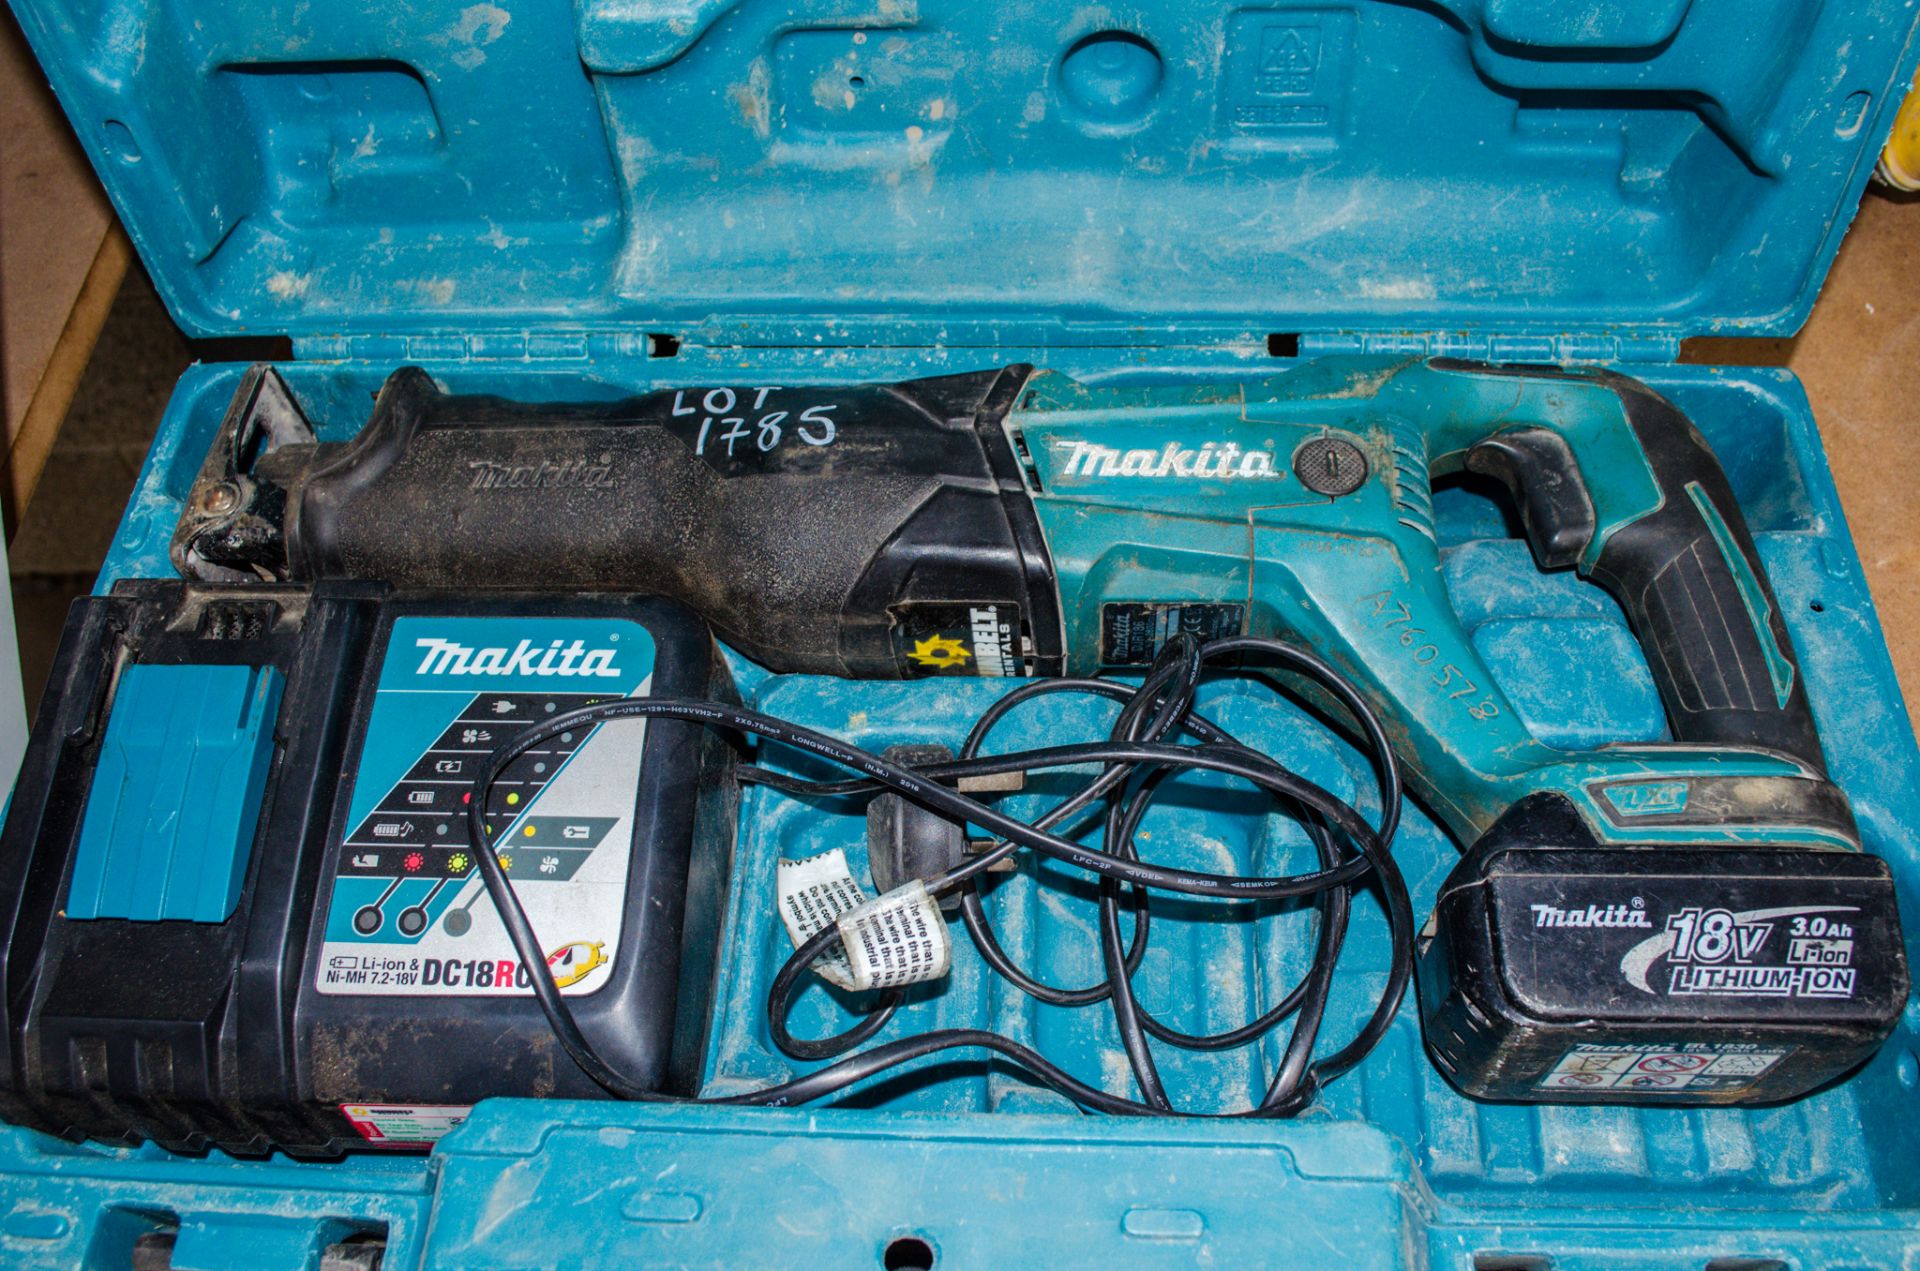 Makita DJR186 18v cordless reciprocating saw c/w battery, charger & carry case A760578